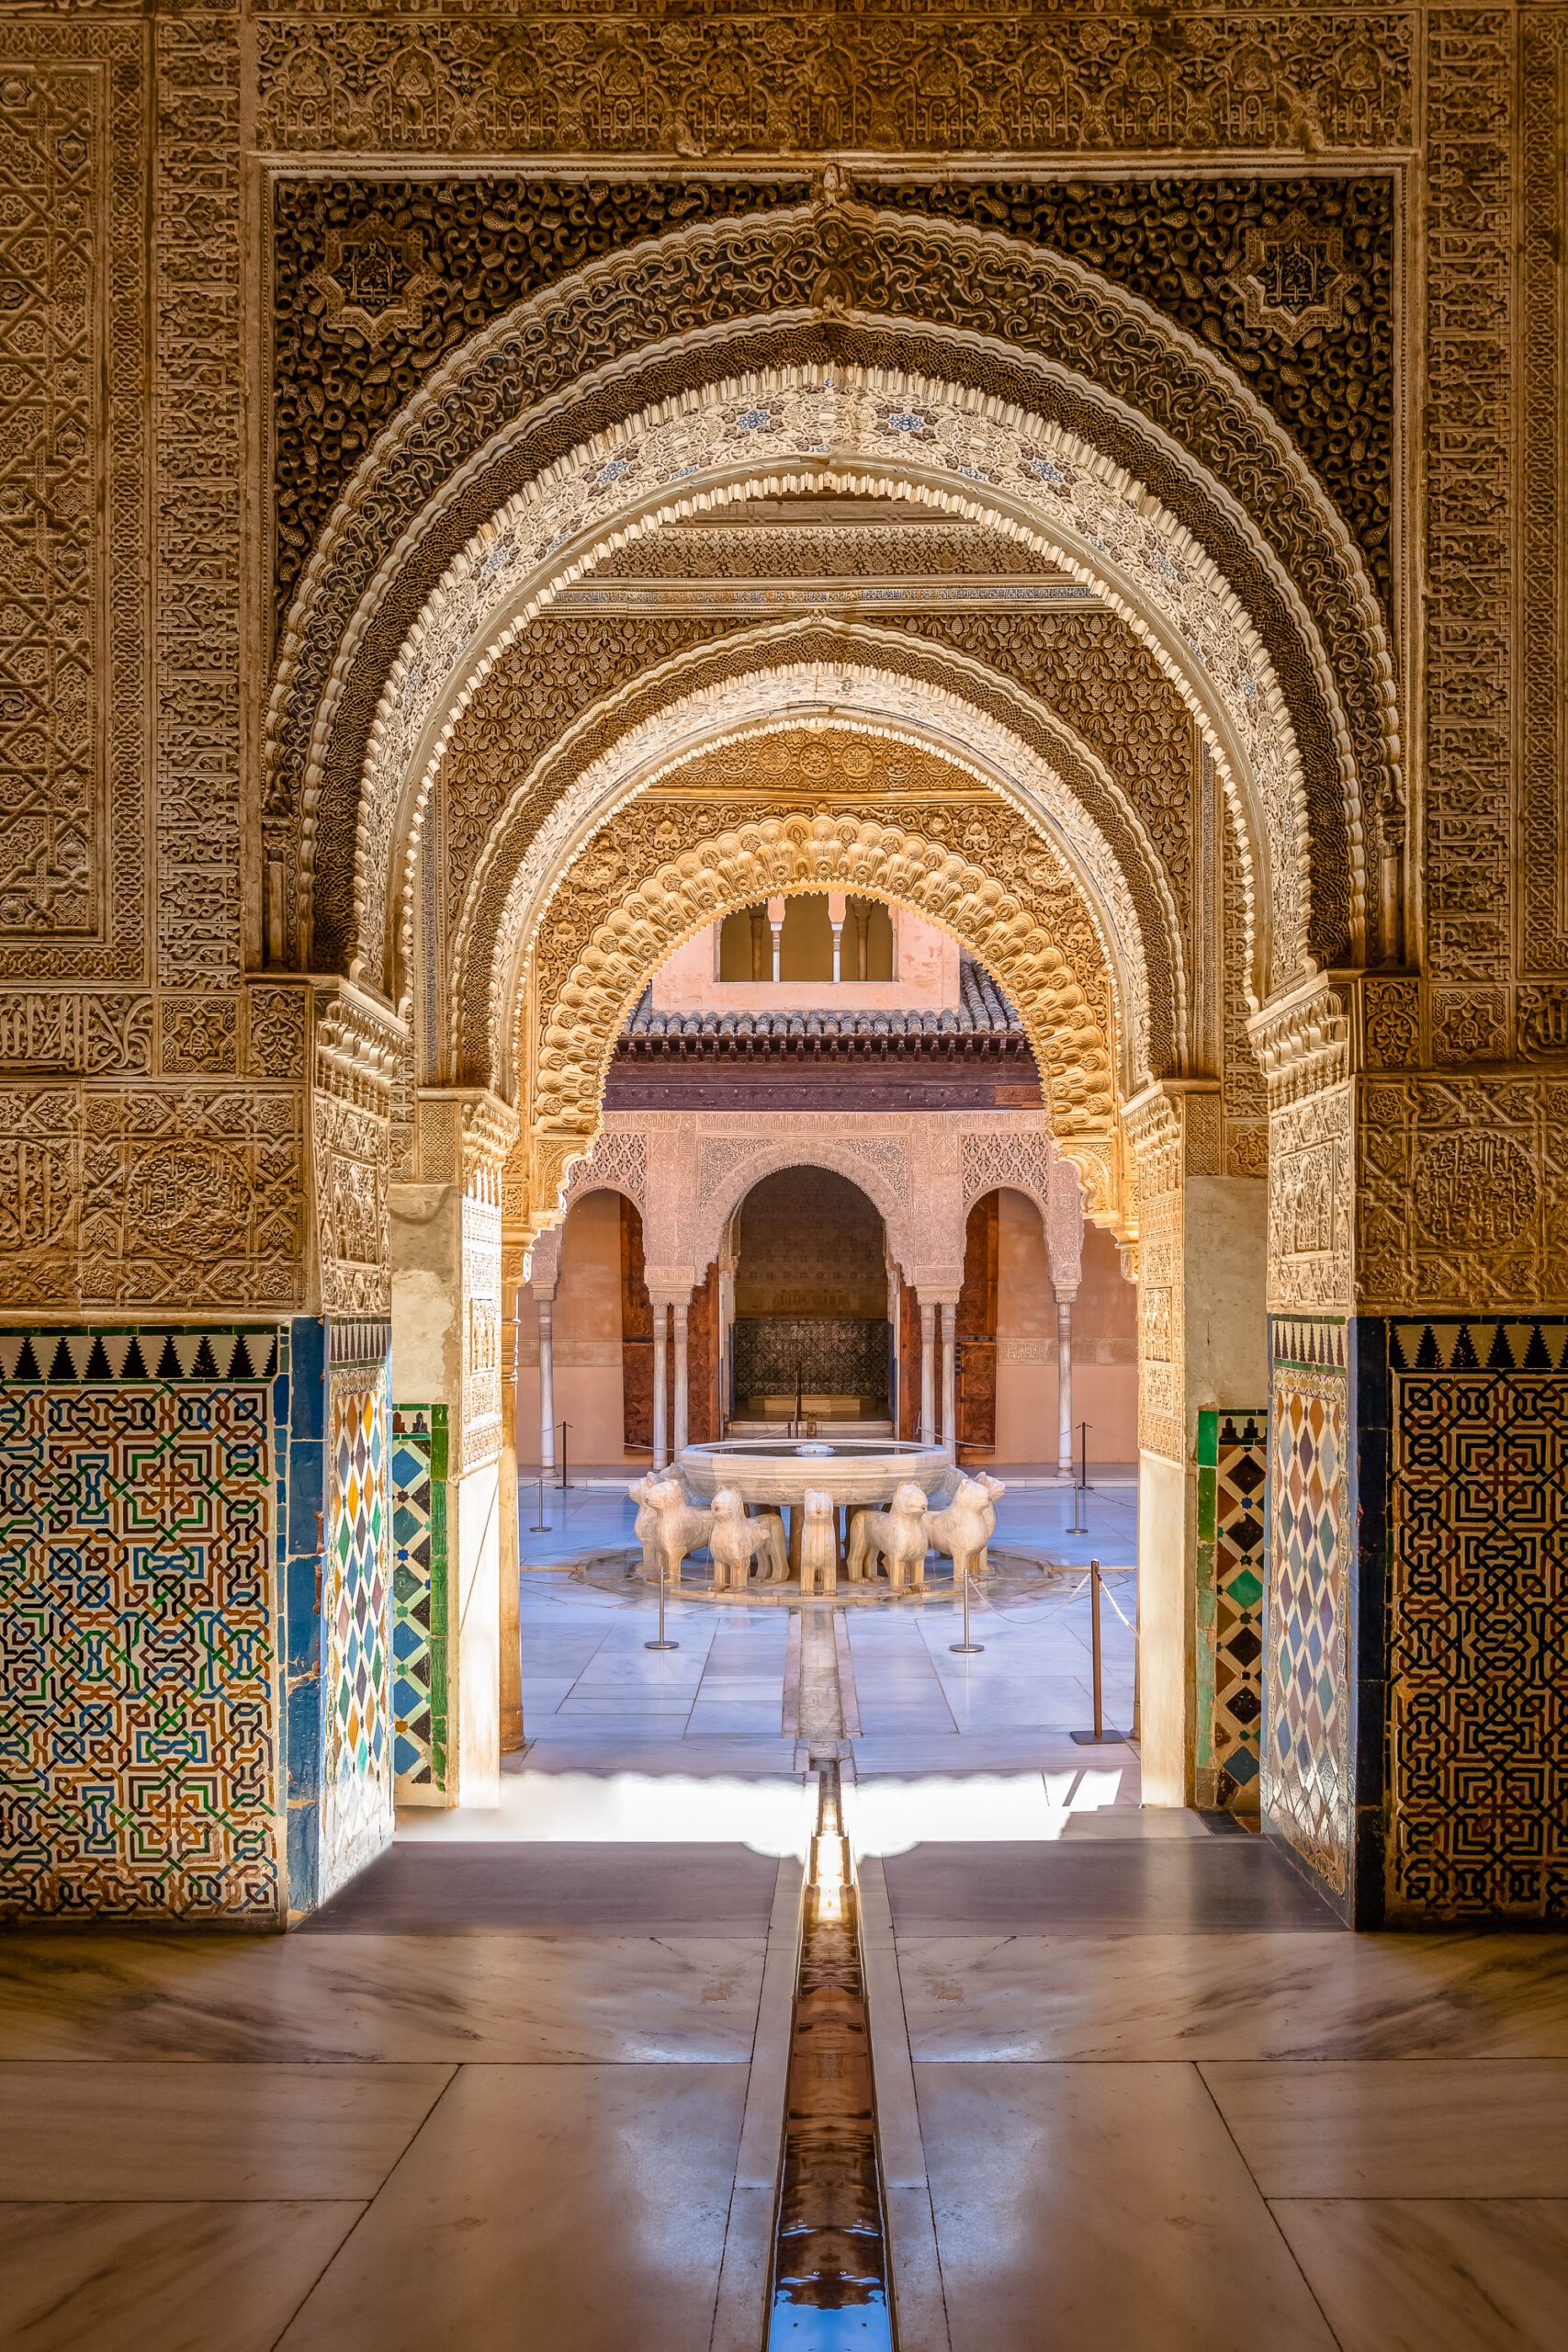 Detail-rich archways of Alhambra Palace with Moorish designs.